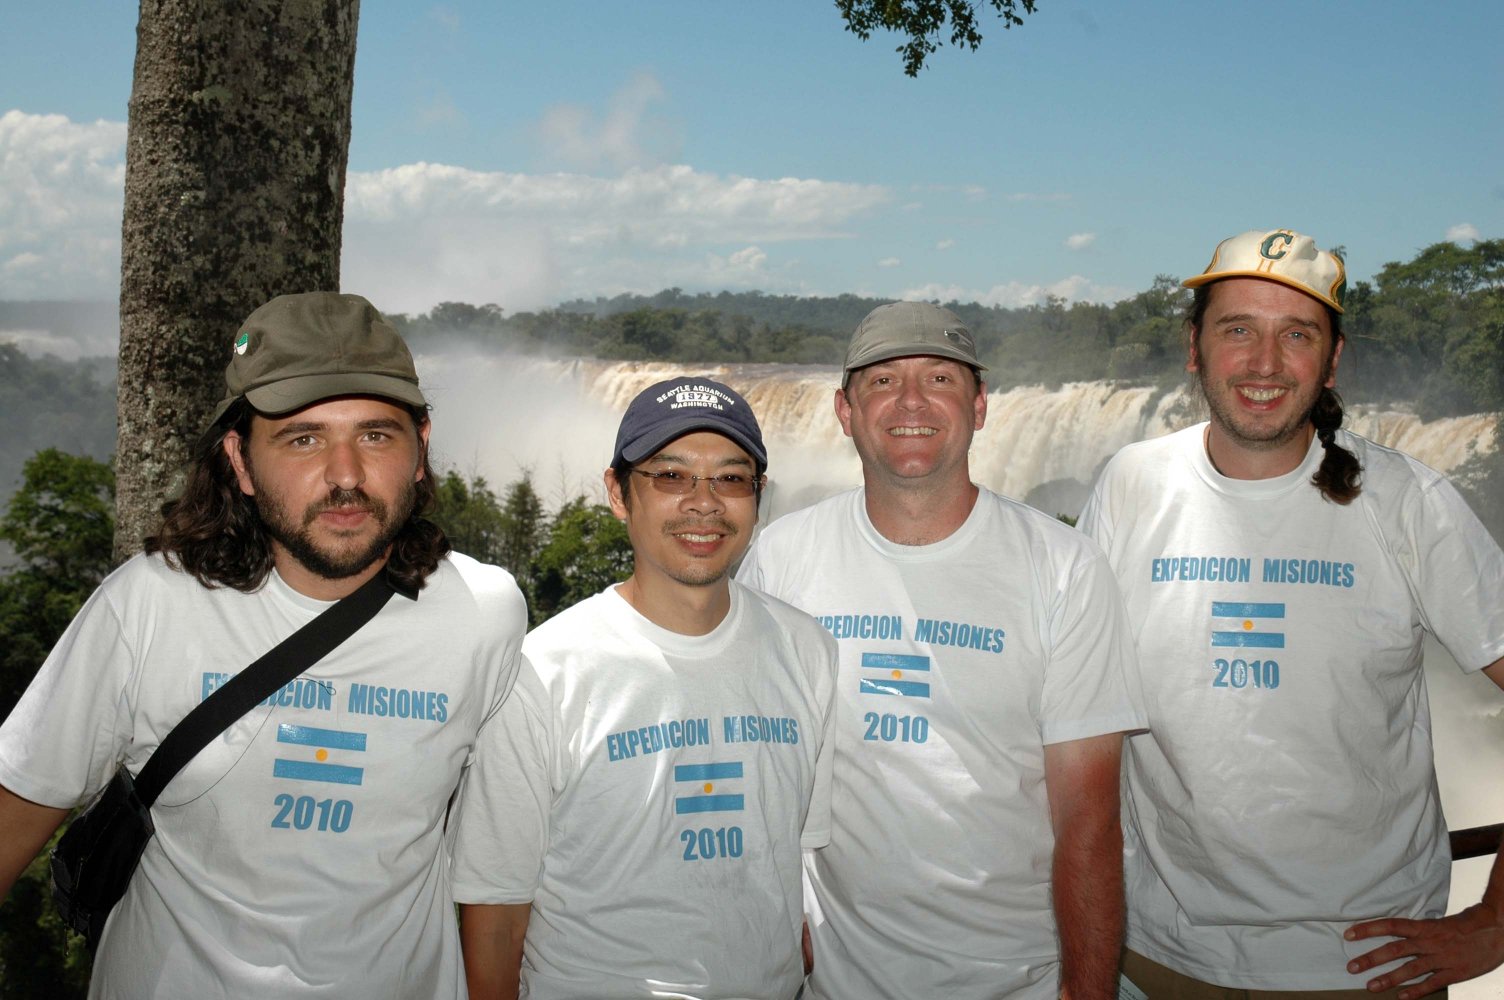 The team of Expedicion Misiones at the Iguazu falls, from left to right: Agustin Villanucci, Kamphol Udomritthiruj, Neil Woodward, Hans-Georg Evers